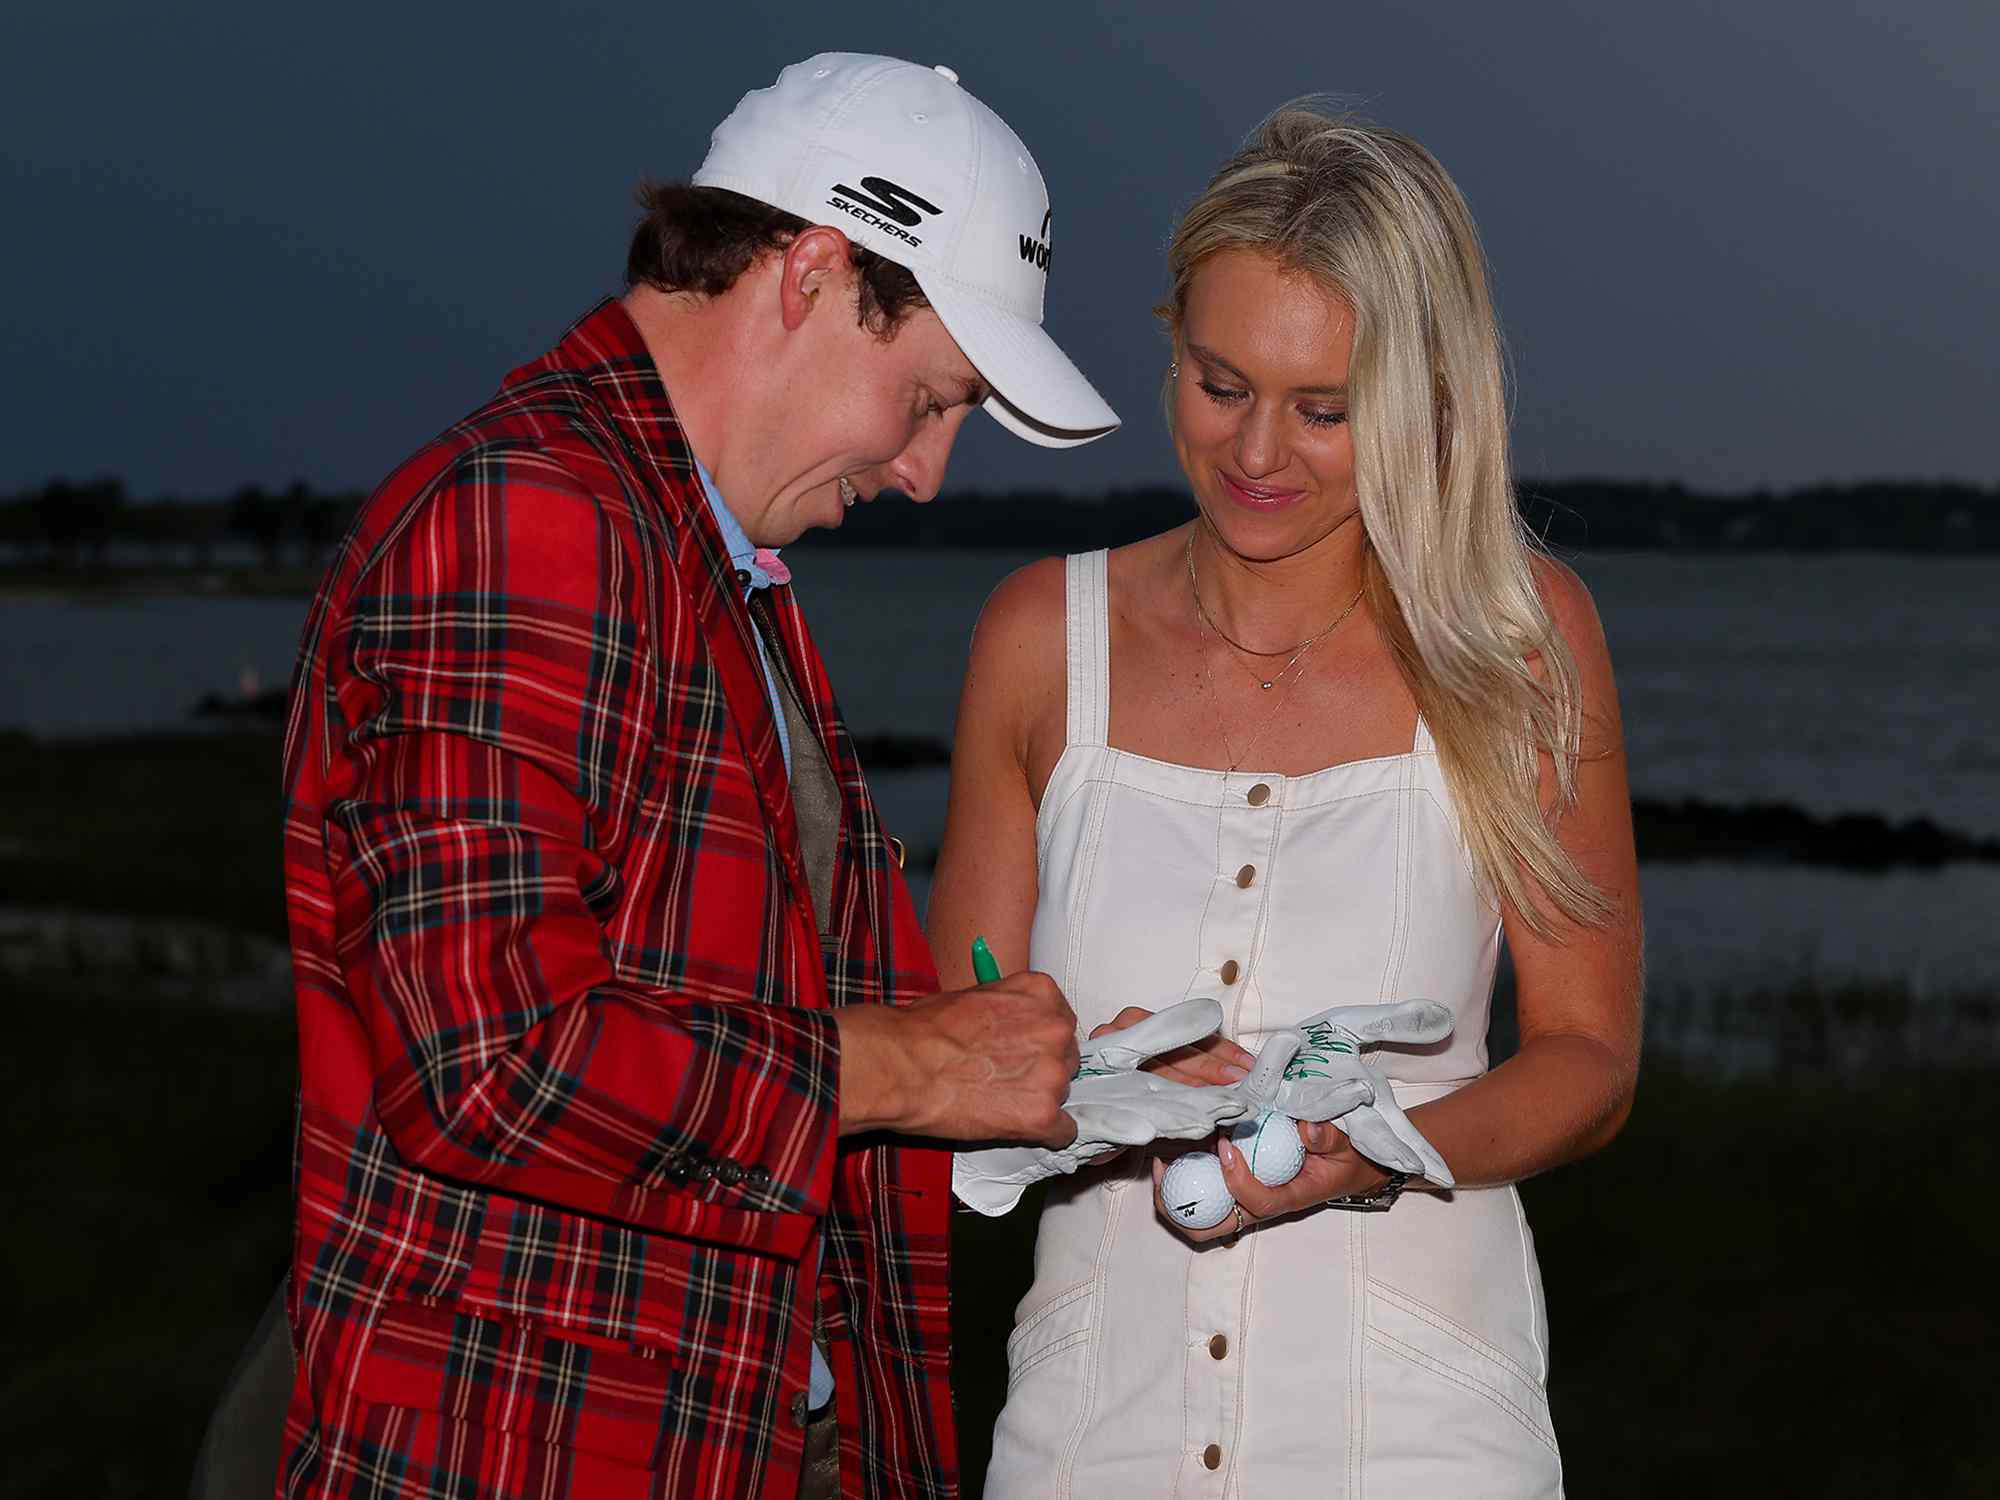 Matt Fitzpatrick of England celebrates in the Heritage Plaid tartan jacket alongside girlfriend Katherine Gaal after winning in a playoff during the final round of the RBC Heritage at Harbour Town Golf Links